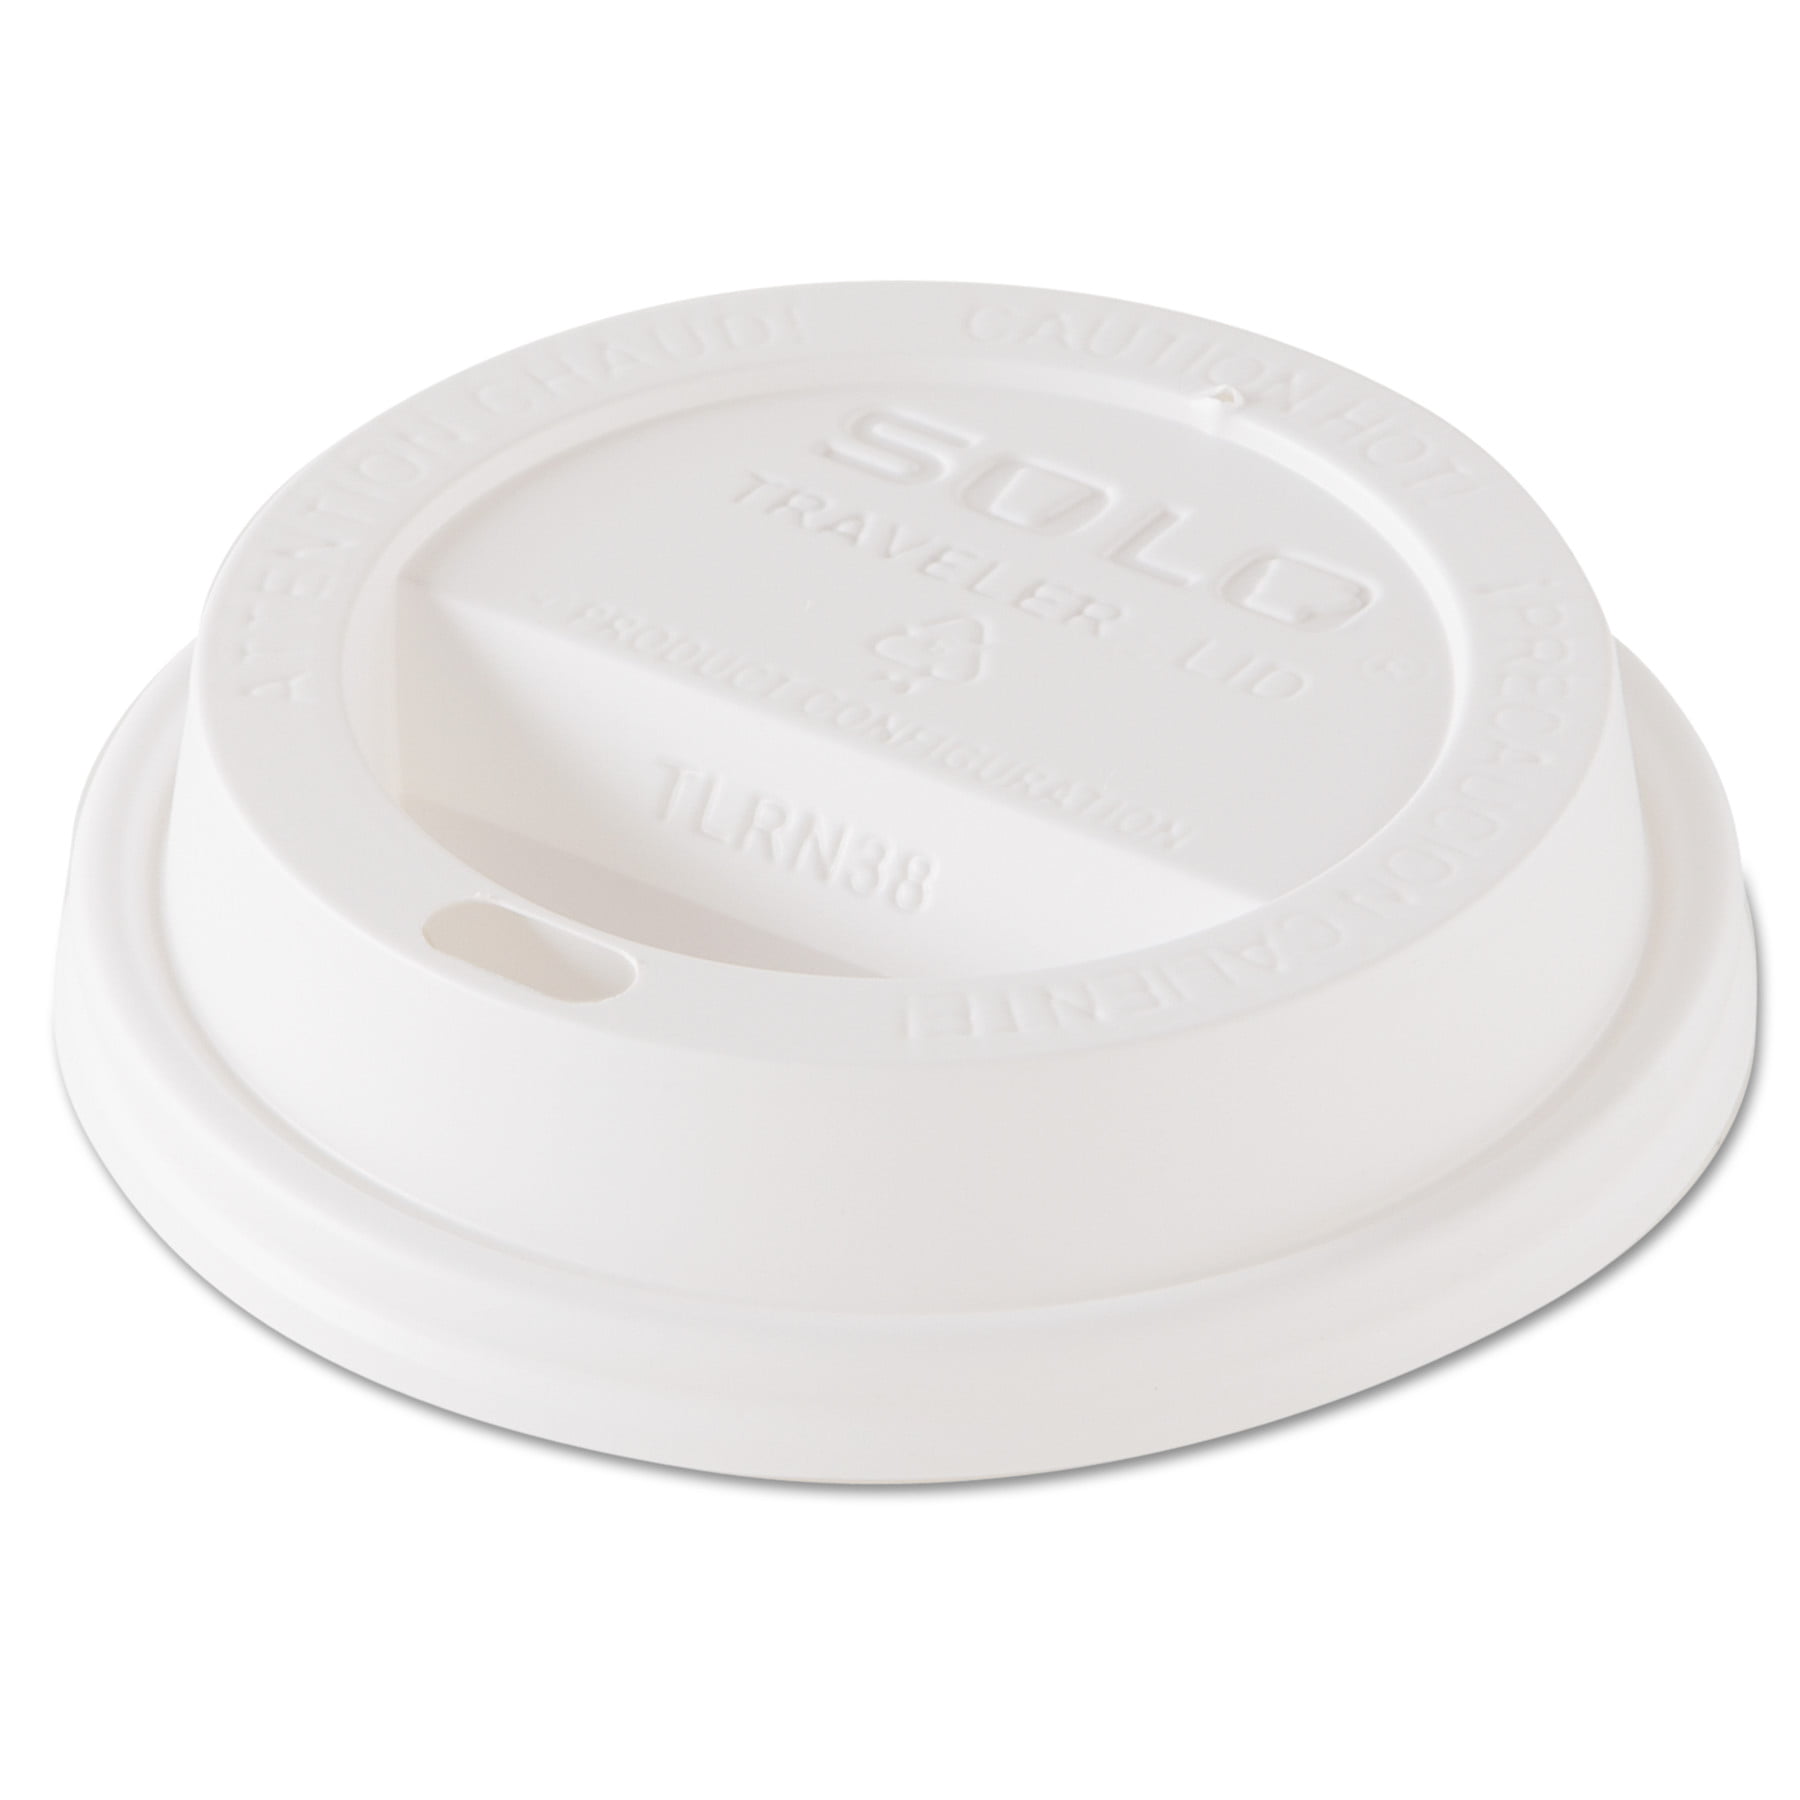 Cups Case/1000 For Solo 8 oz Details about   Solo TL38R2-0007 White Traveler Plastic Lid 